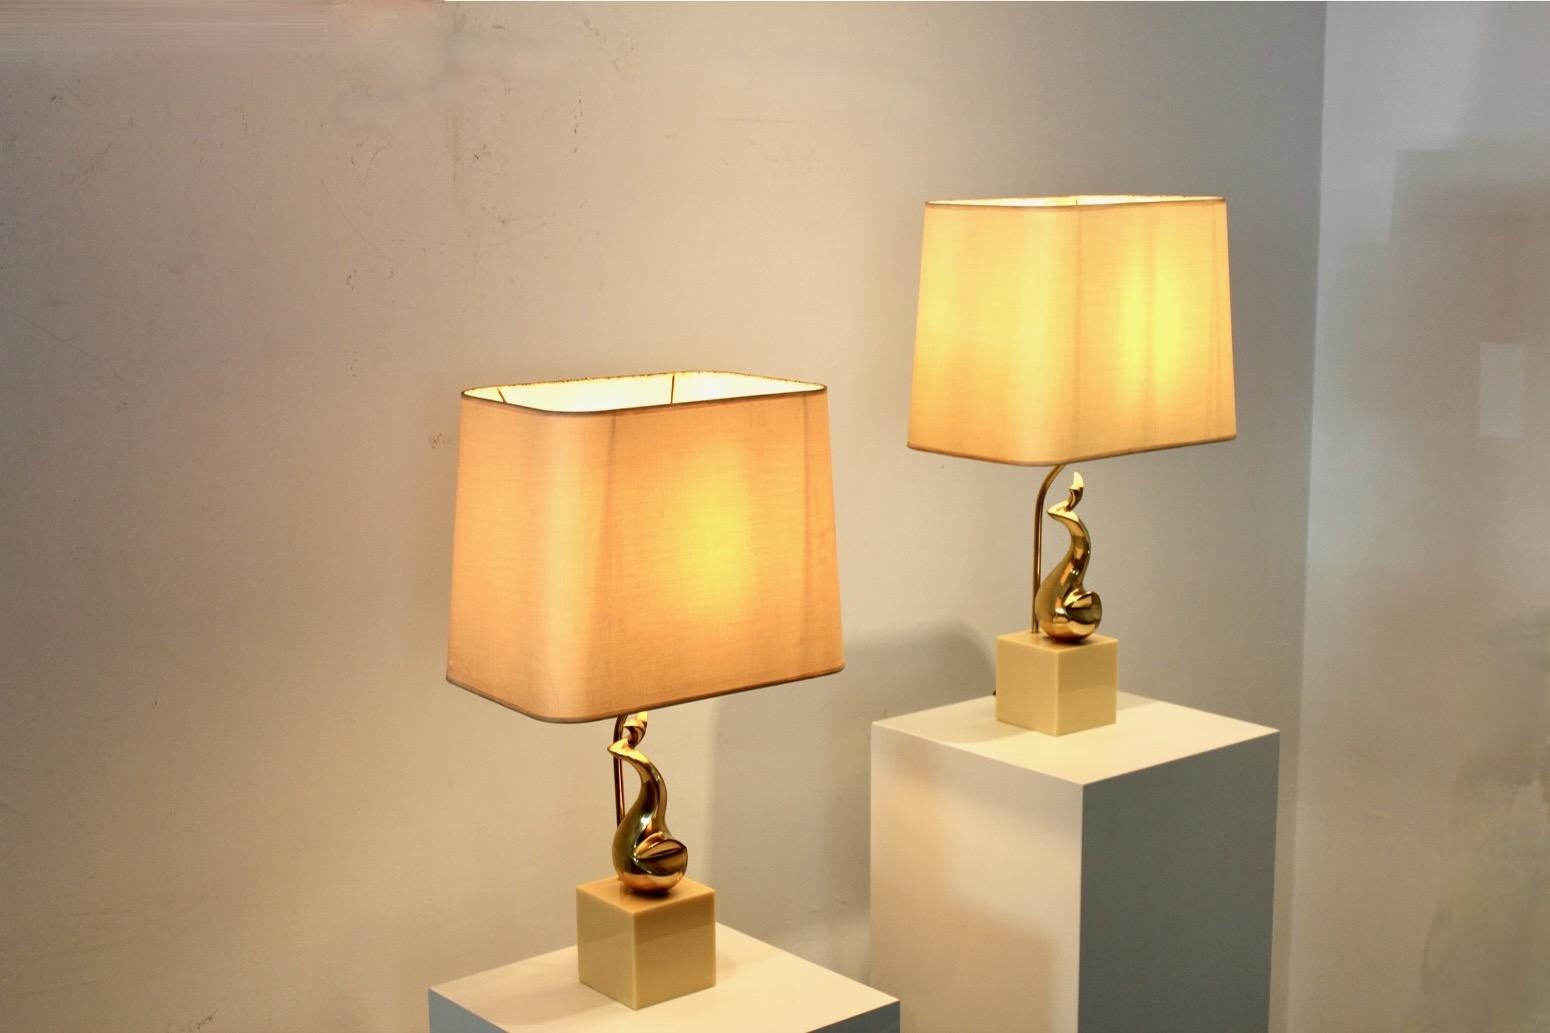 Pair of Exclusive Philippe-Jean Brass Art Sculpture Table Lamps, Signed For Sale 2